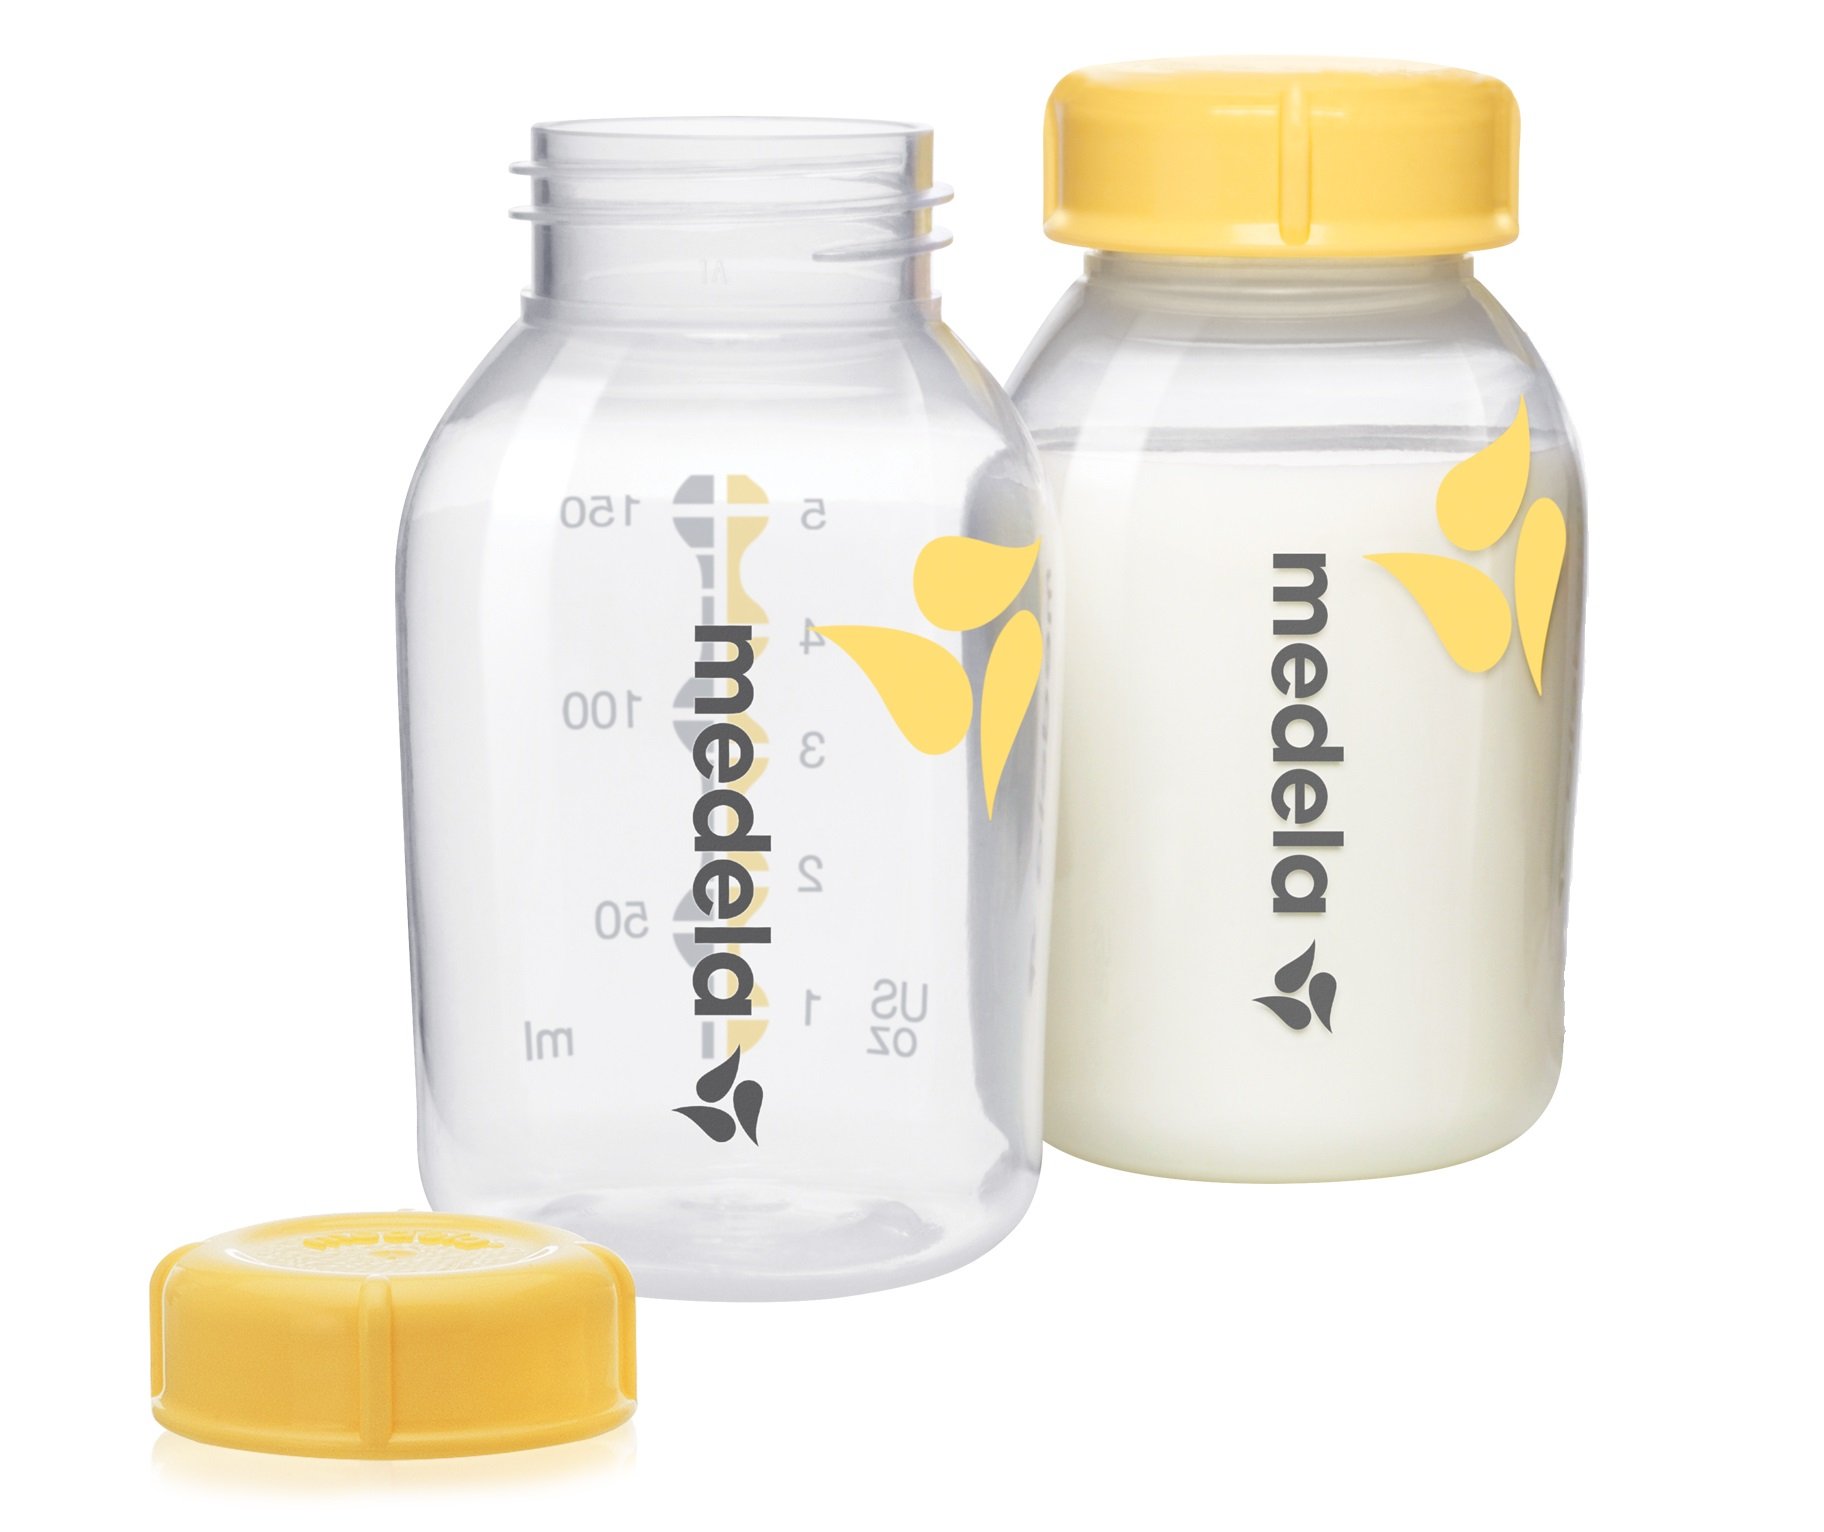 Medela Hands-Free Collection Cups, Compatible with Freestyle Flex & Breast Milk Collection and Storage Bottles, 6 Pack, 5 Ounce Breastmilk Container